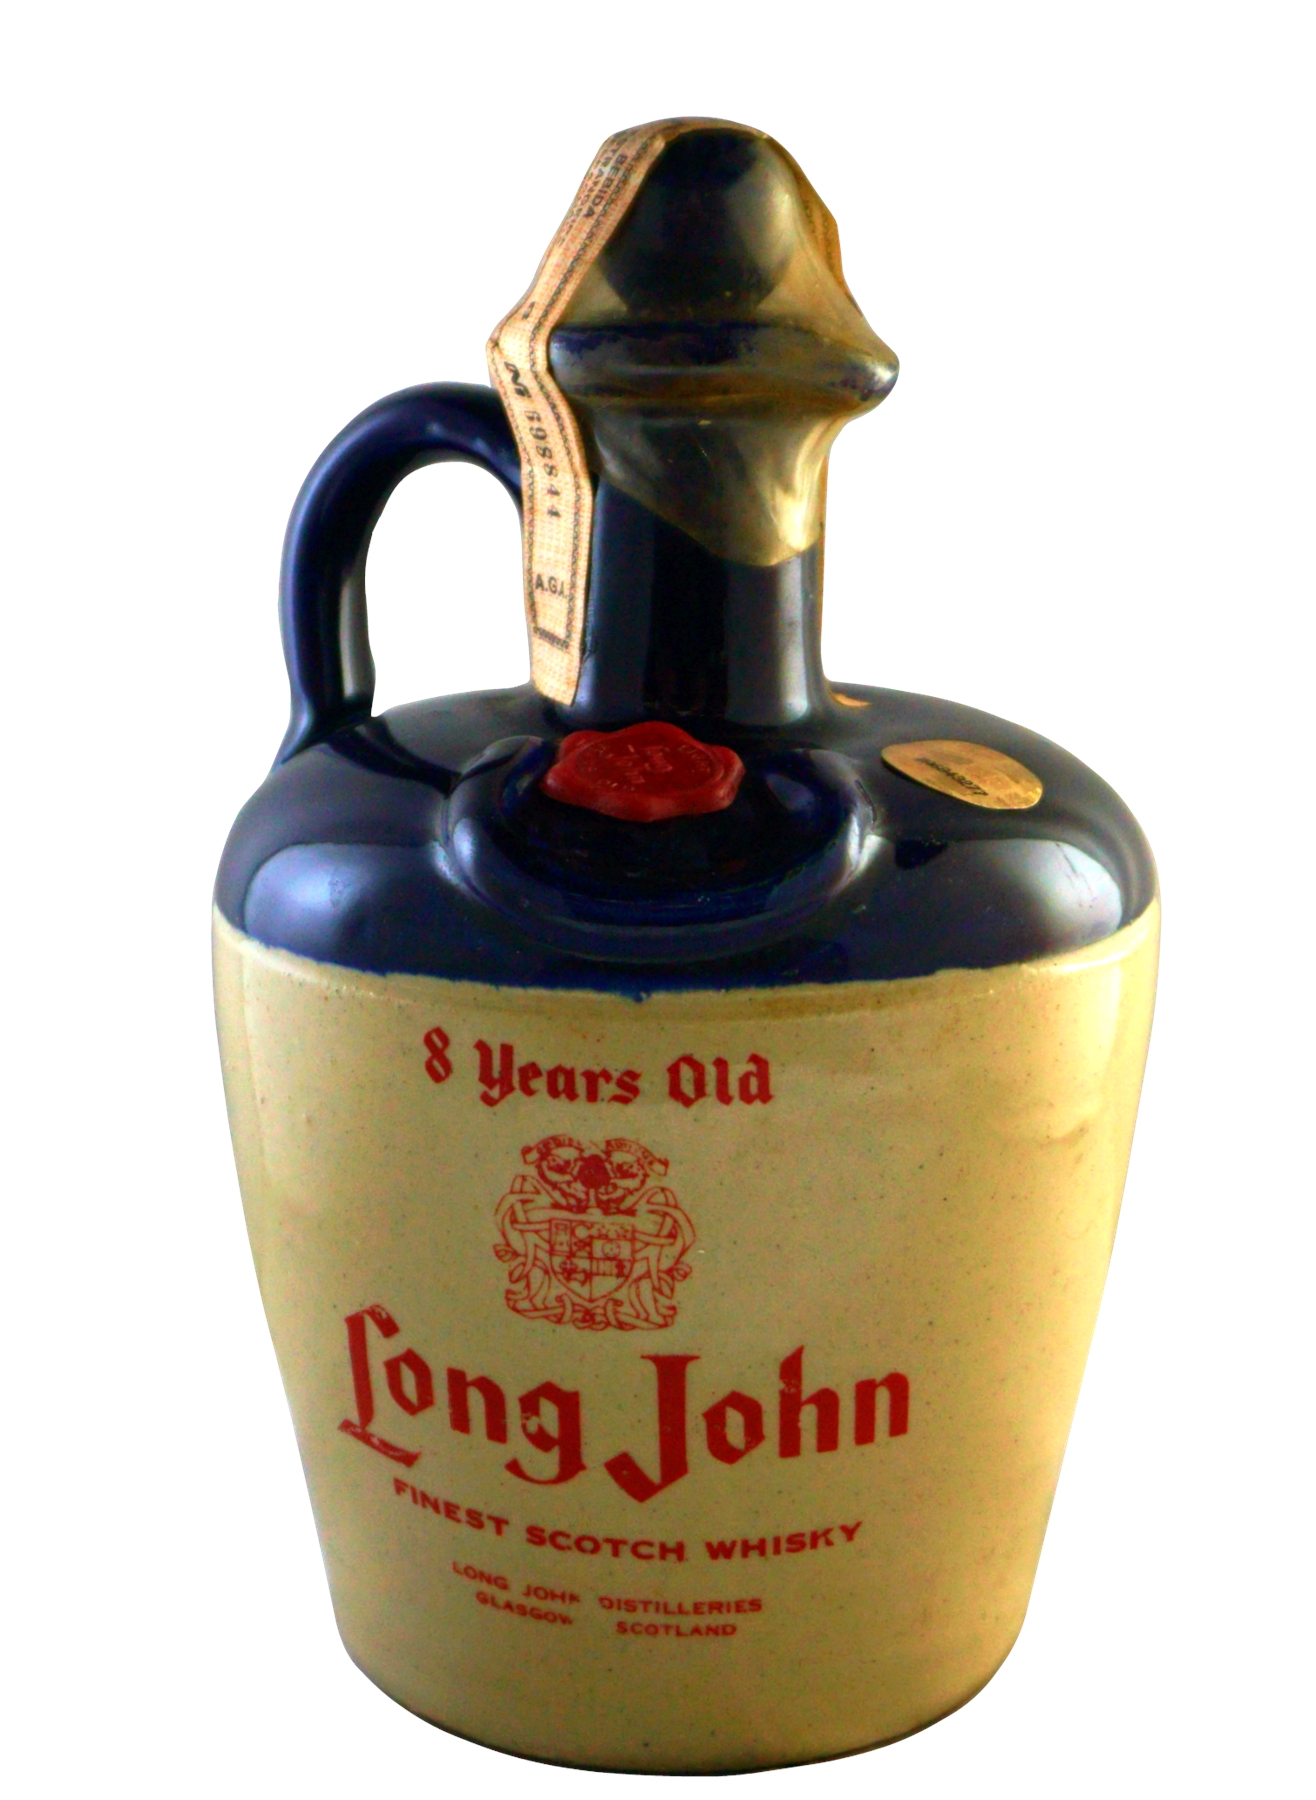 LONG JOHN 8 YEARS OLD DECANTER - Manuel Tavares - Cellar and Fine